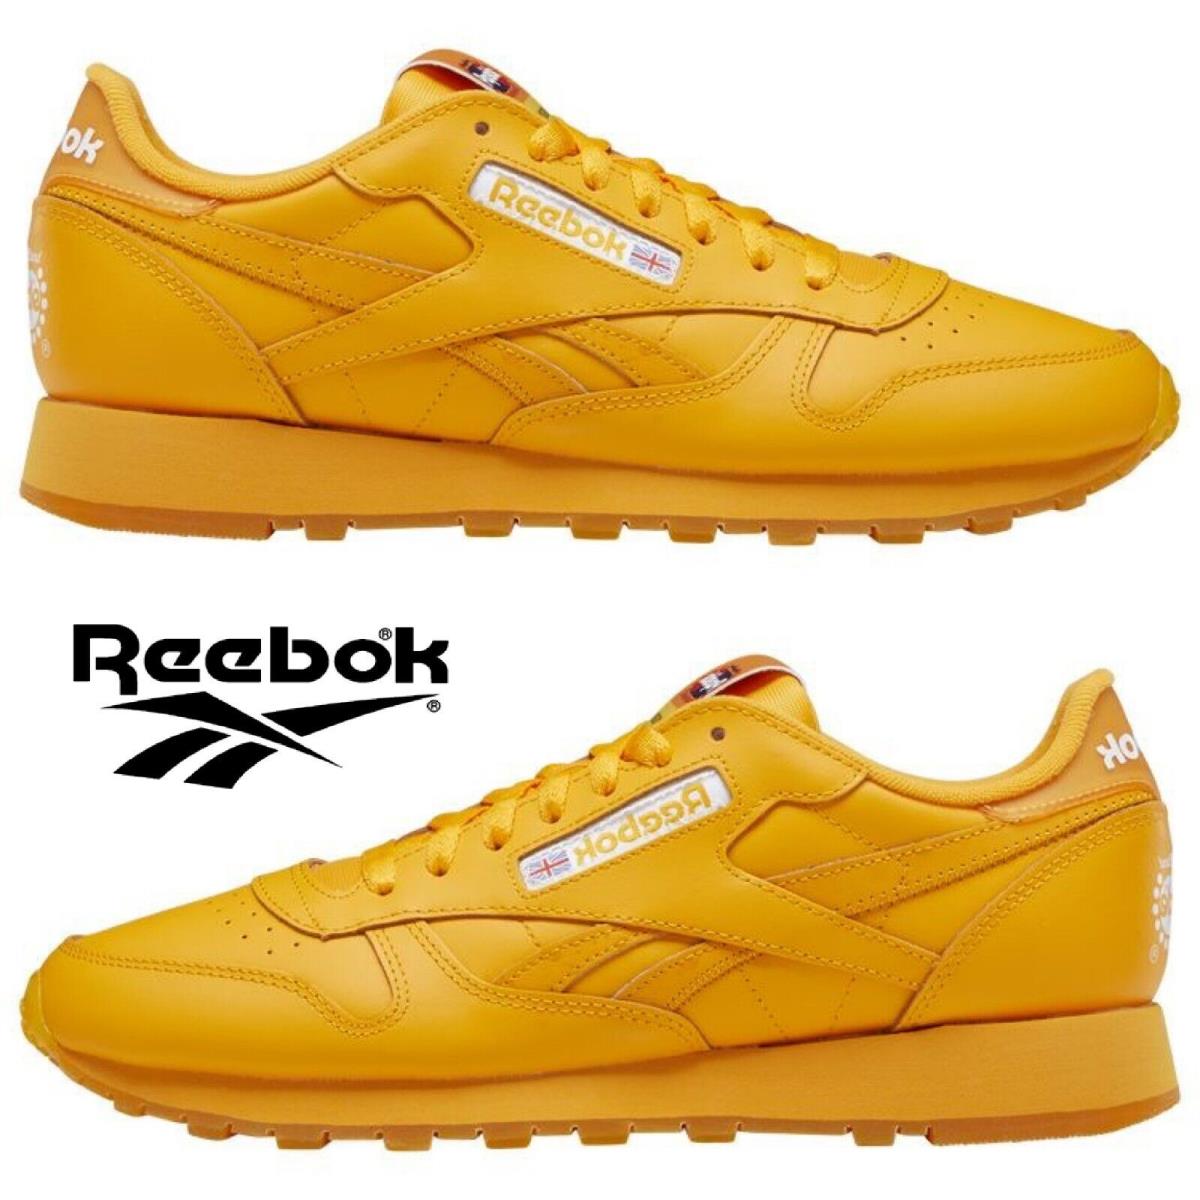 Reebok Classic Leather Popsicle Men`s Sneakers Running Training Shoes Casual